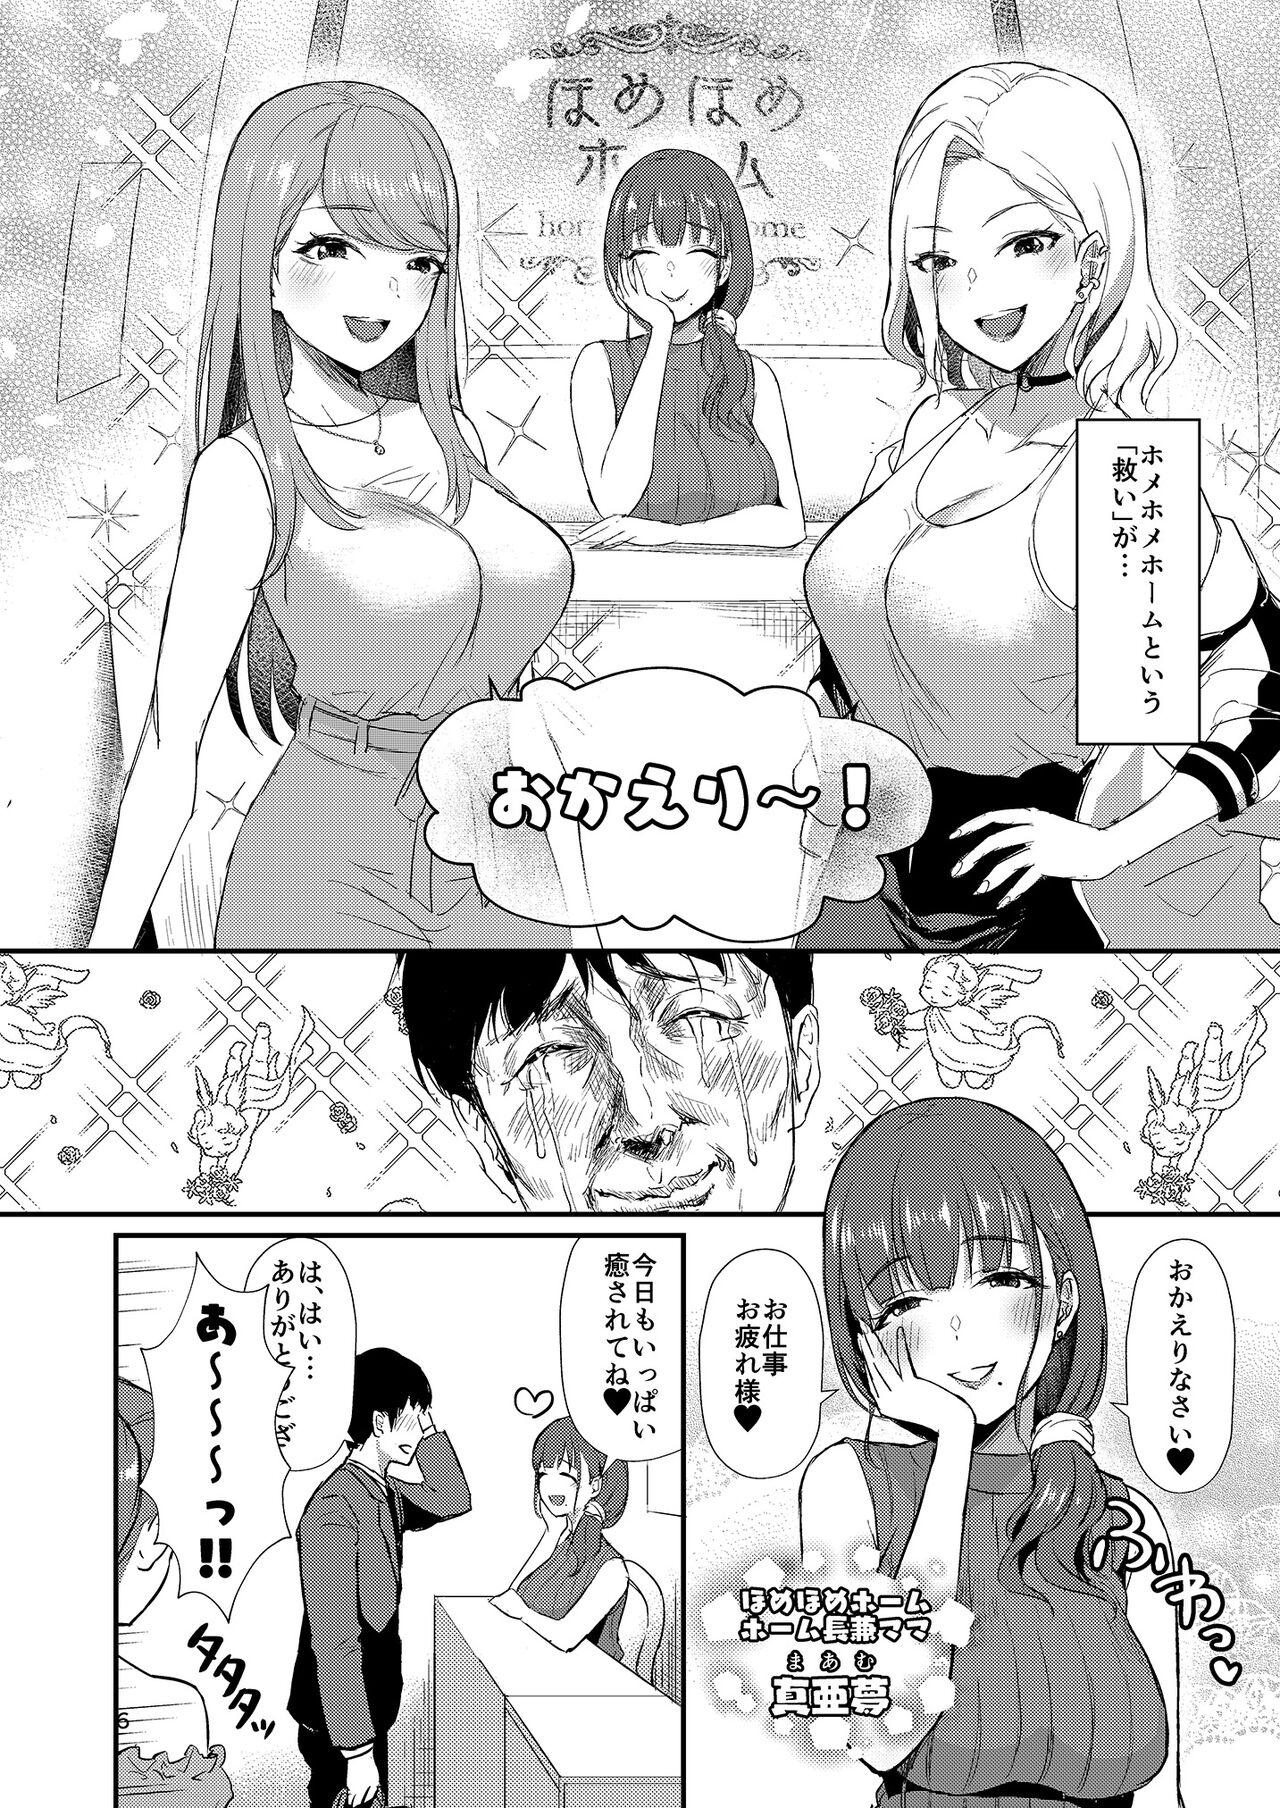 Vadia Homehome Home e Youkoso! - Welcome to Home Home Home! - Original Great Fuck - Page 6